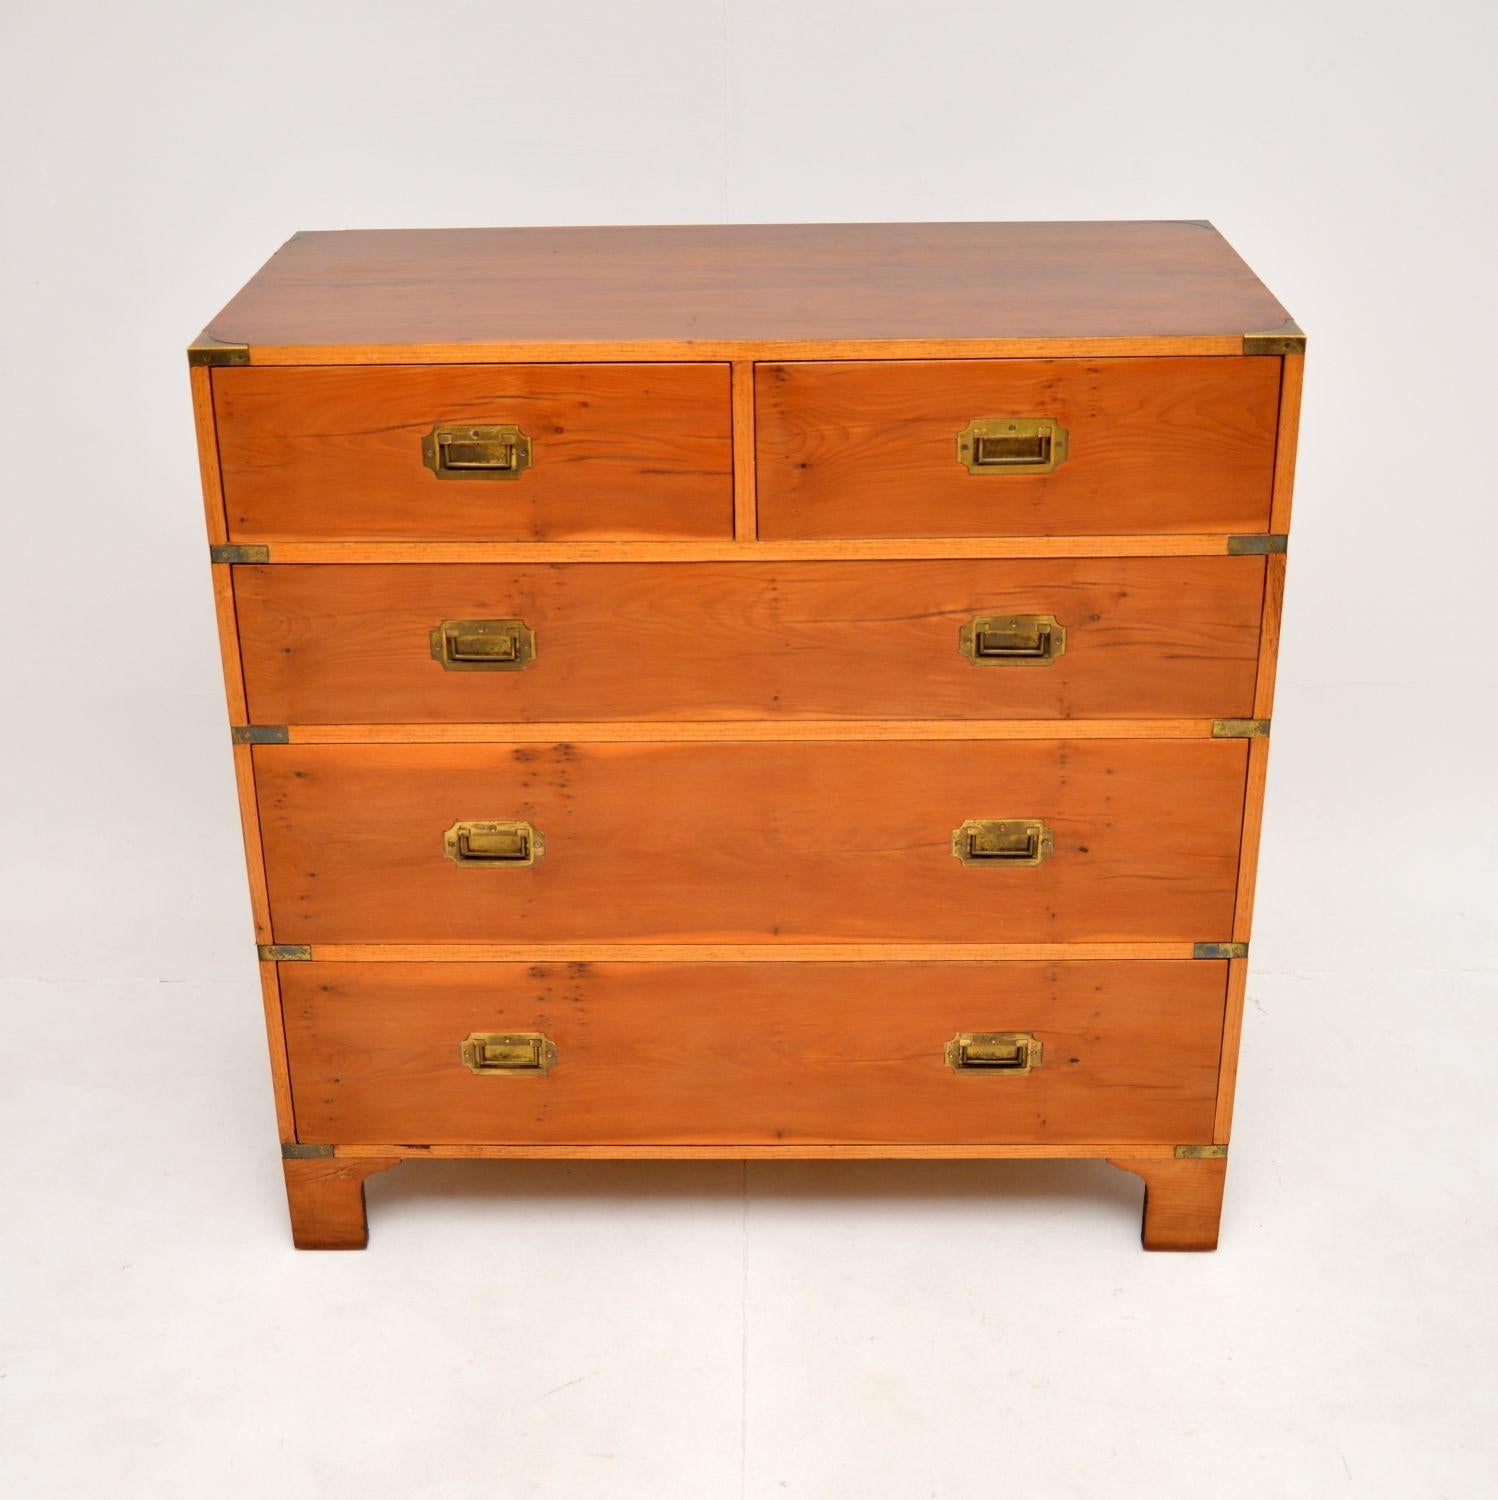 British Antique Military Campaign Style Chest of Drawers in Yew